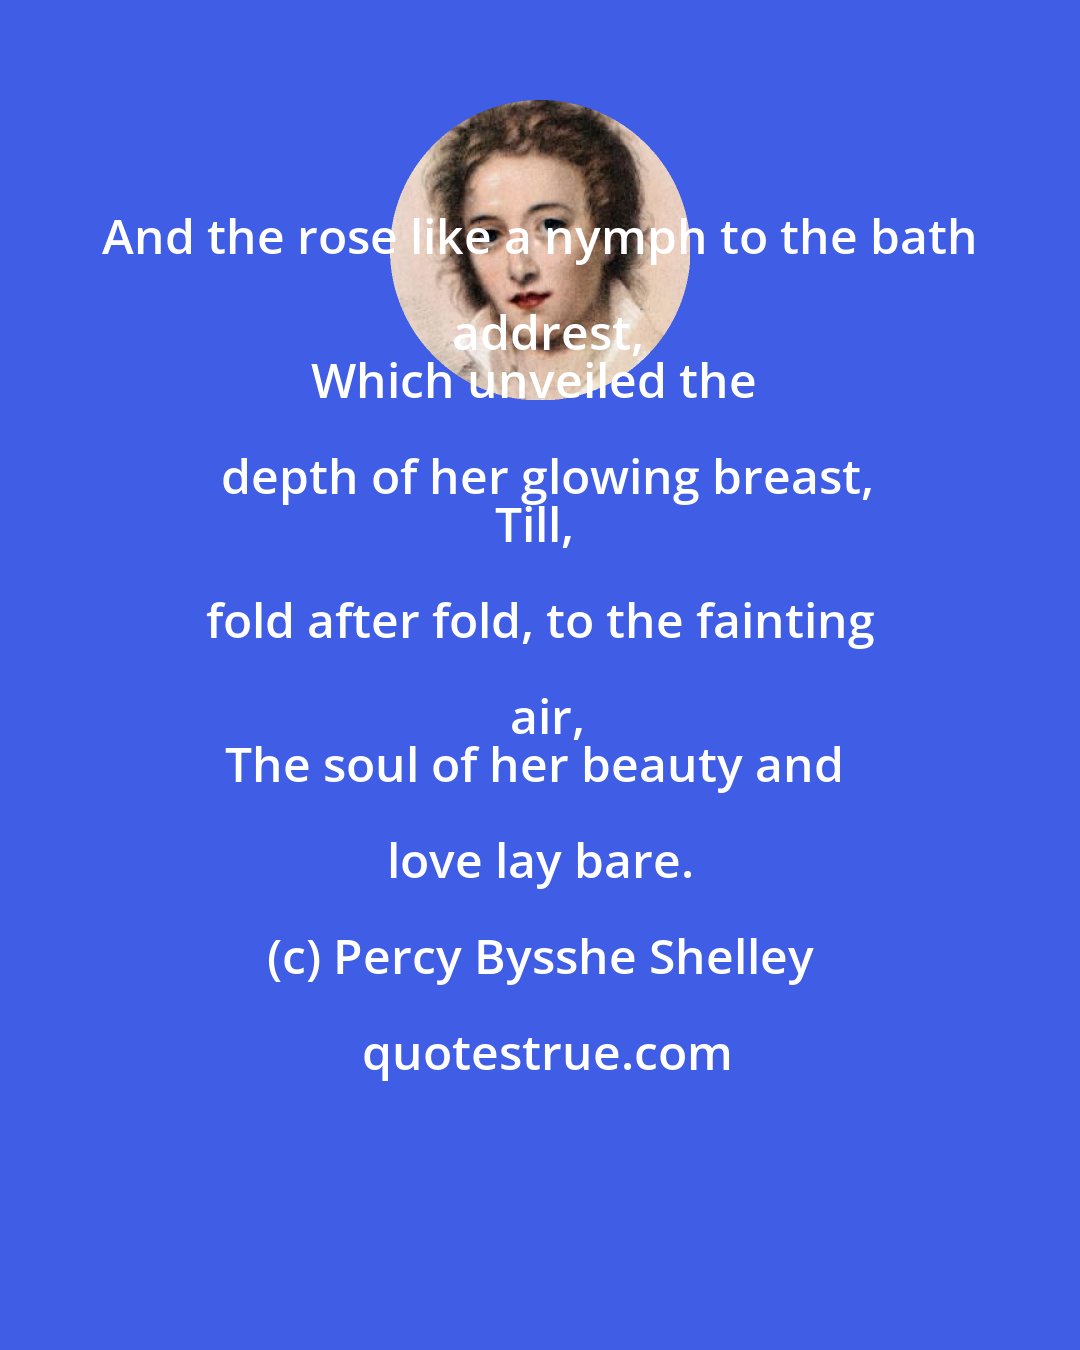 Percy Bysshe Shelley: And the rose like a nymph to the bath addrest,
Which unveiled the depth of her glowing breast,
Till, fold after fold, to the fainting air,
The soul of her beauty and love lay bare.